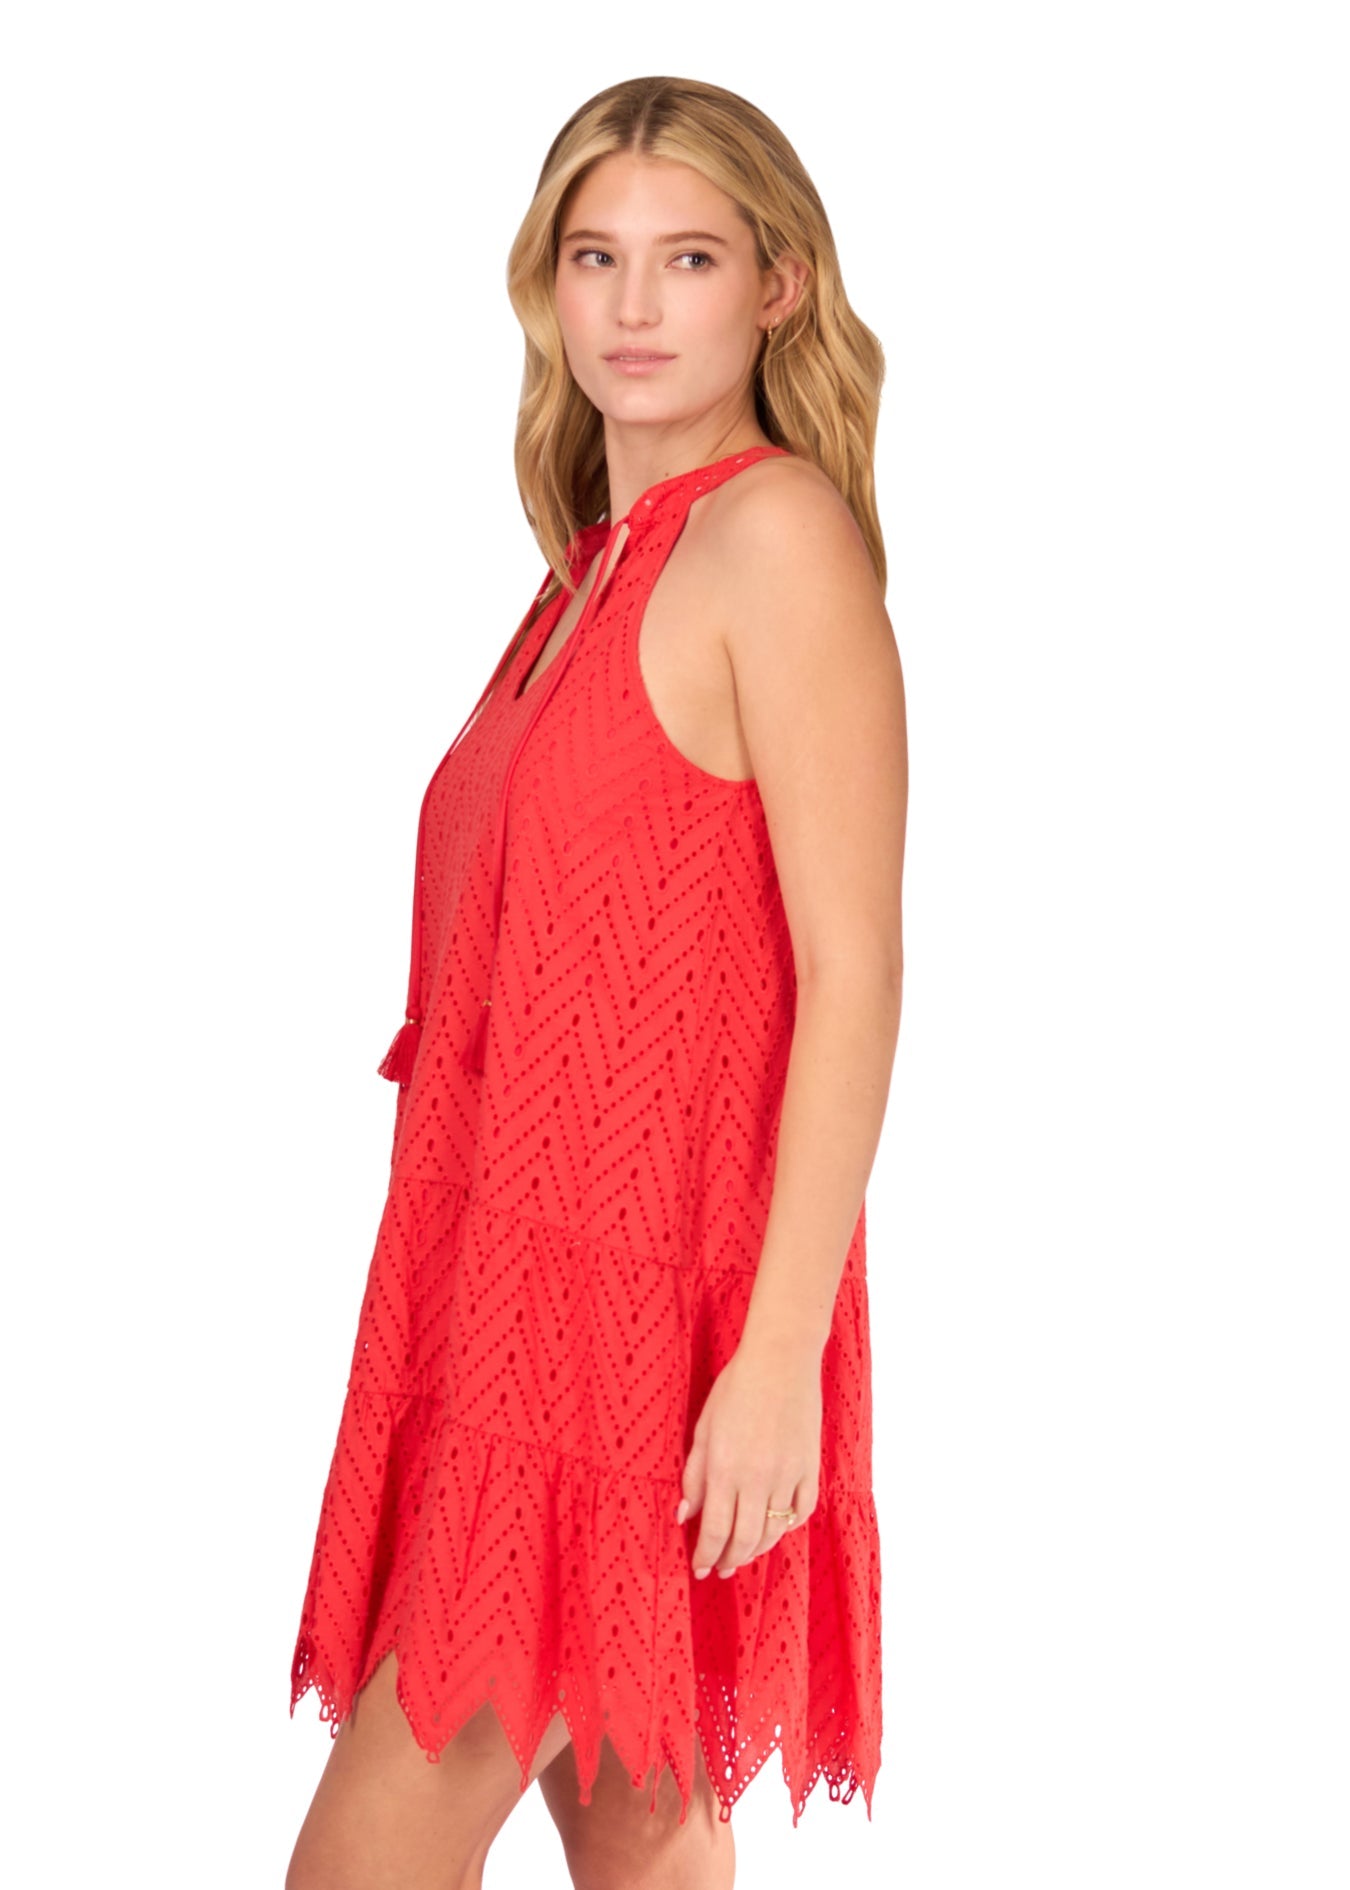 The side of a blonde woman in front of a white background wearing the Poppy Red Eyelet Halter Dress.